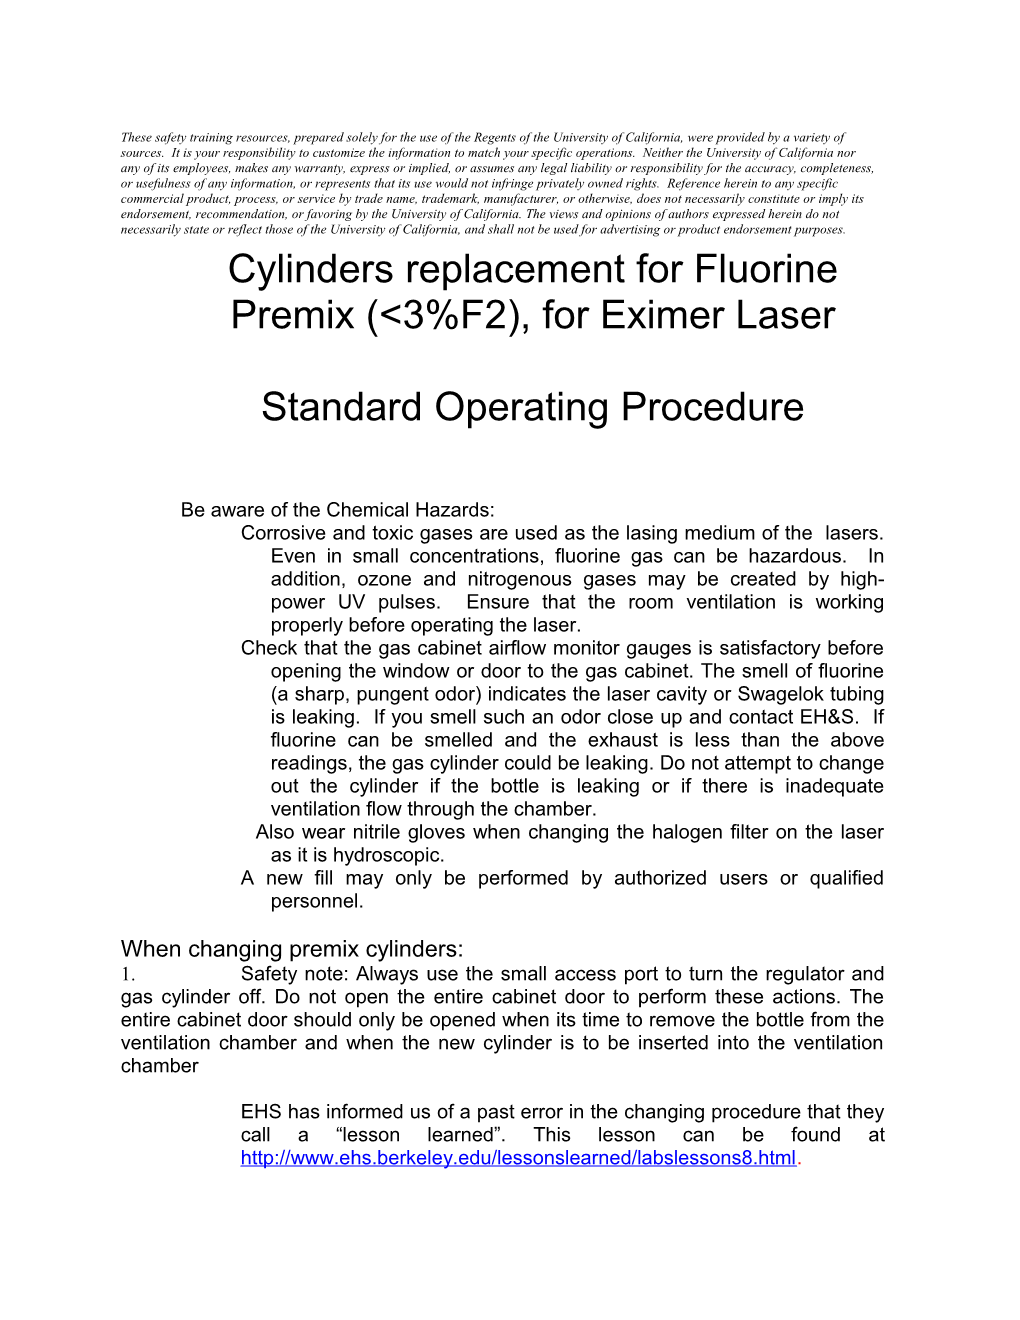 Cylinders Replacement for Fluorine Premix (&lt;3%F2), for Eximer Laser